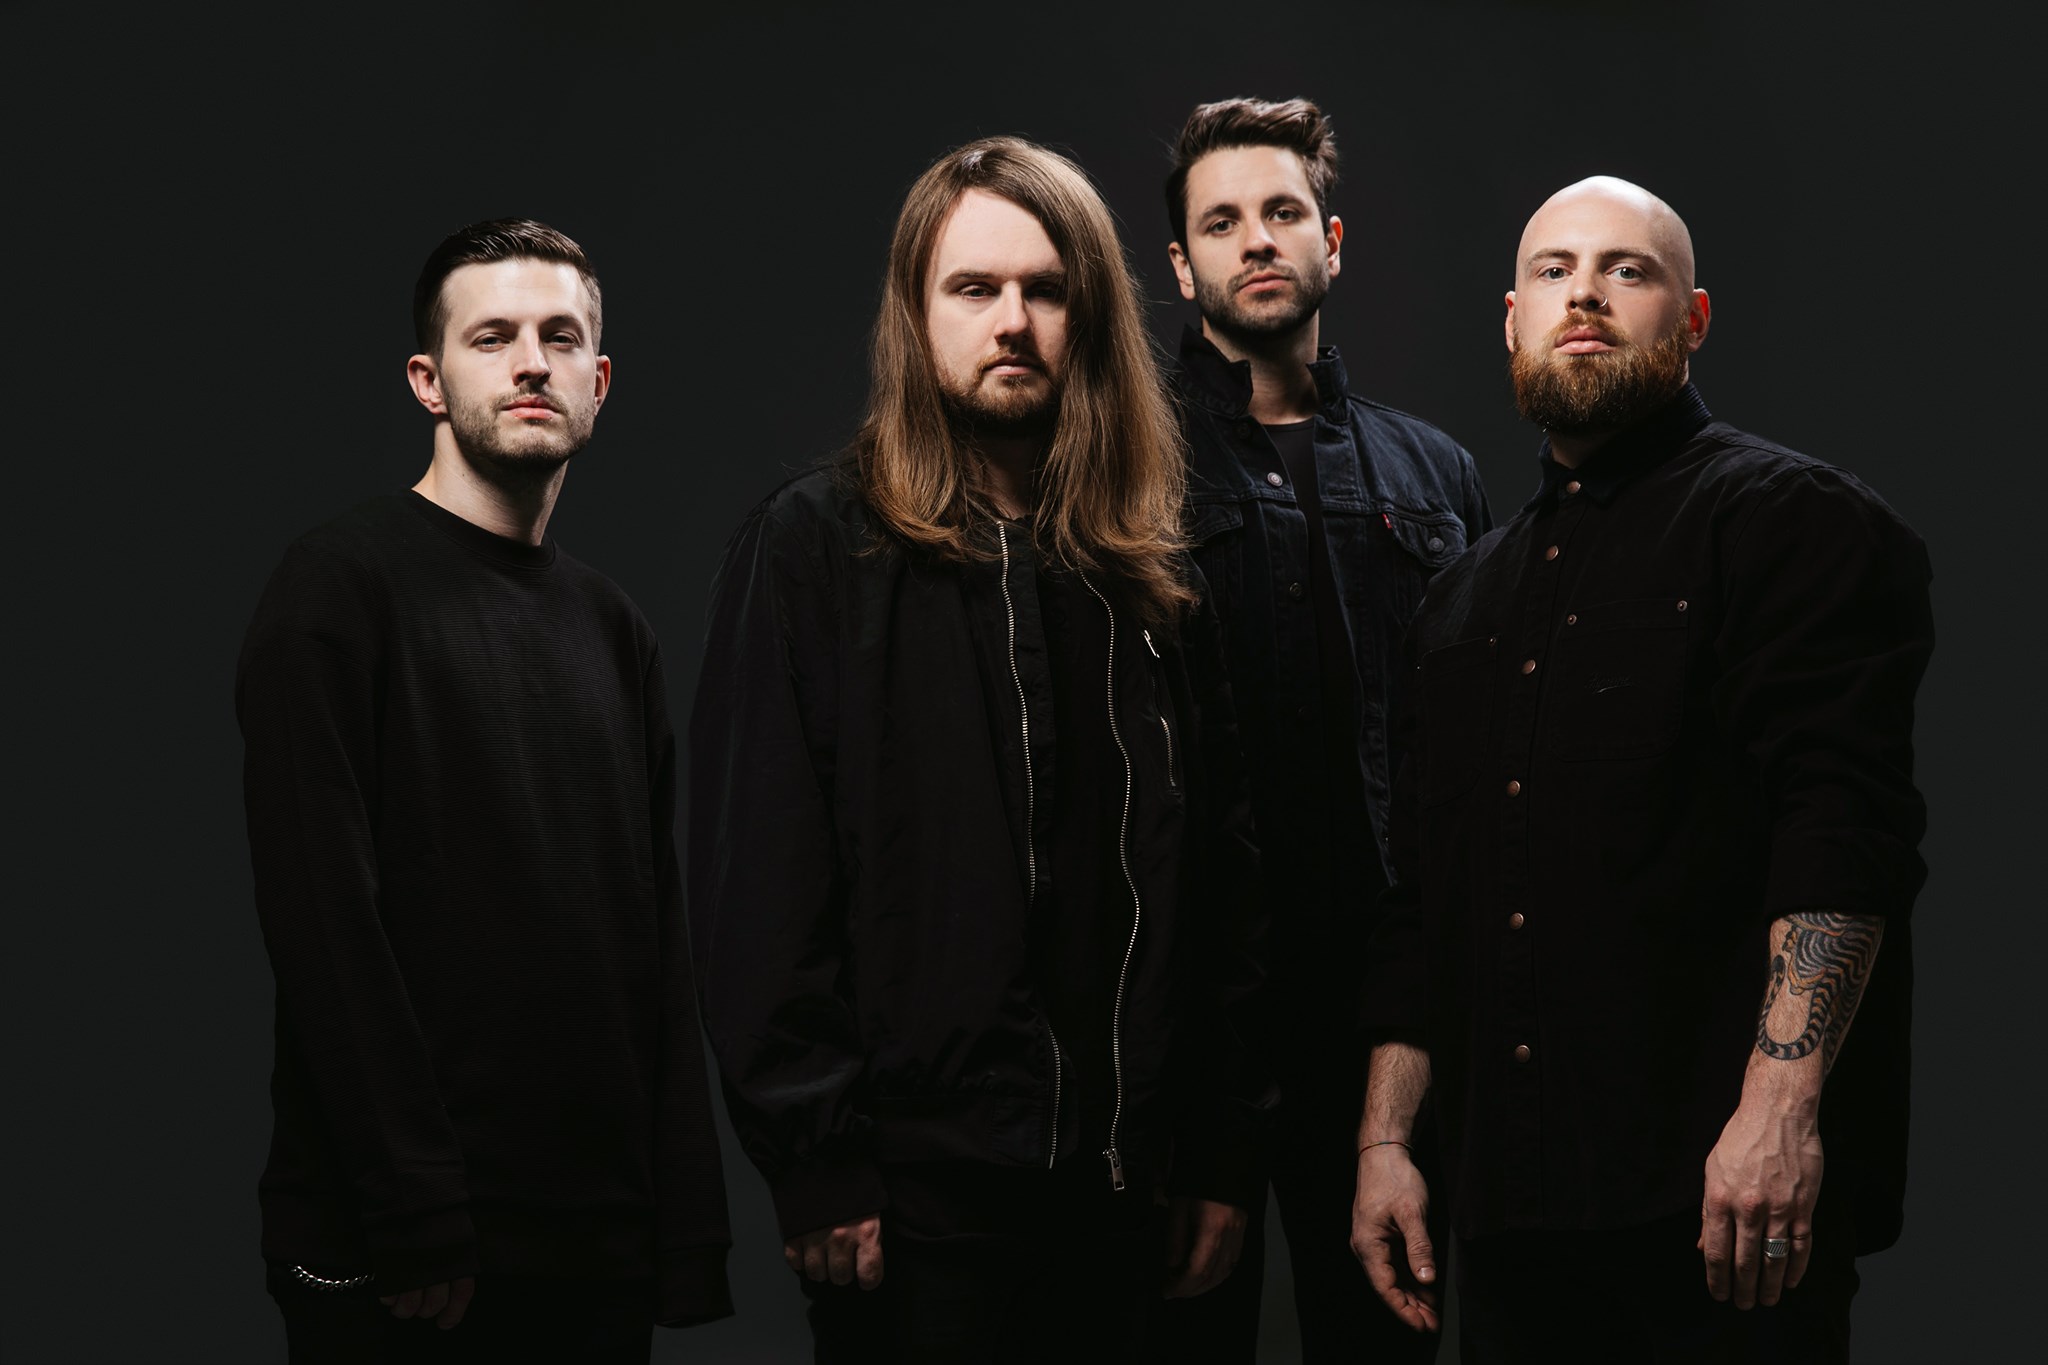 Fit For A King drop new single “God of Fire” with Ryo of Crystal Lake